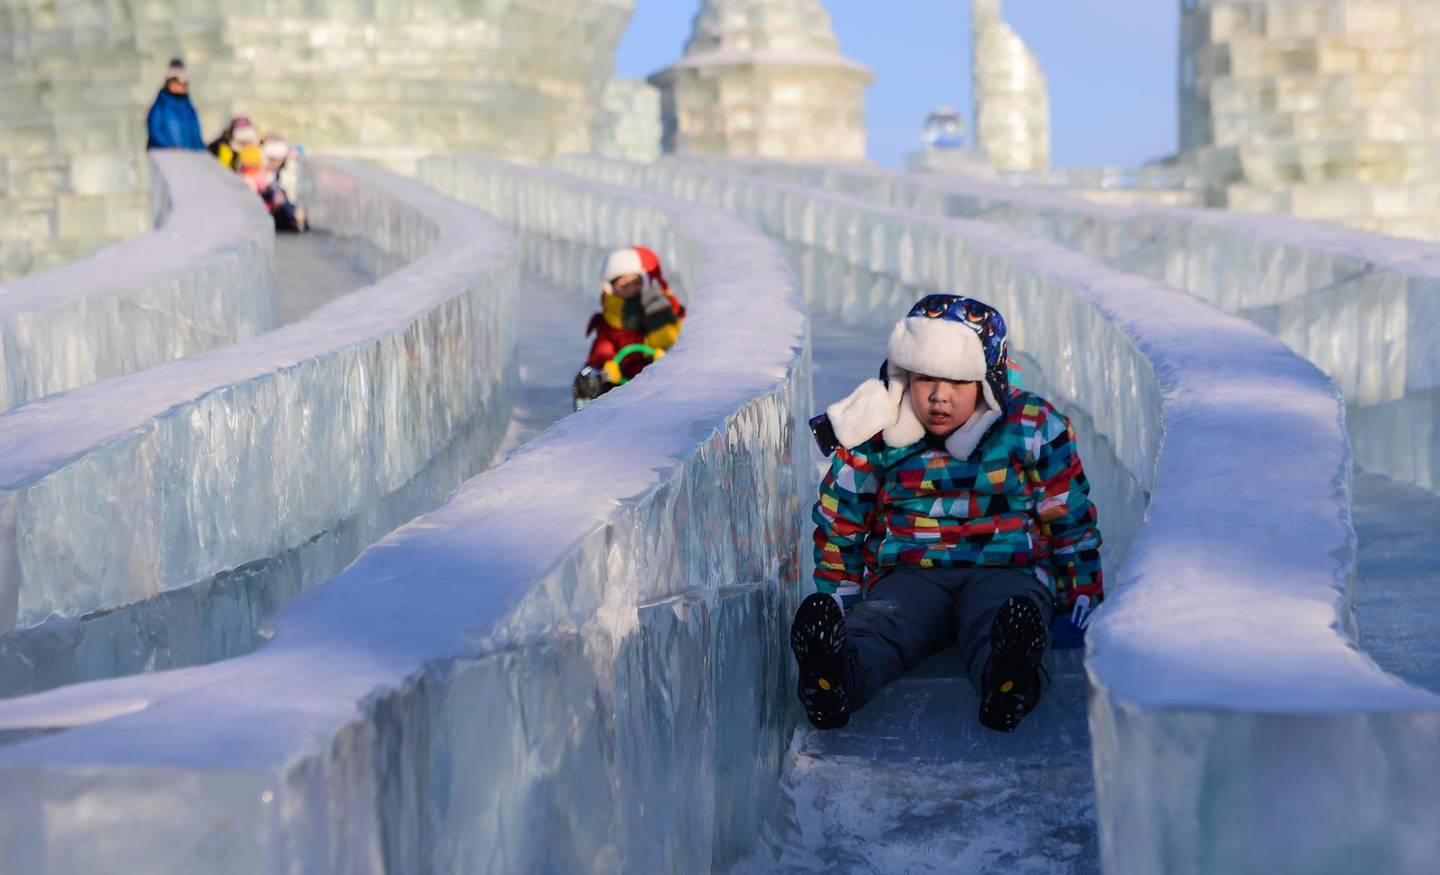 HARBIN, CHINA - JANUARY 16: Children enjoy the ice slides during the 33rd Harbin International Ice and Snow Festival at Harbin Ice And Snow World in Harbin, China on January 16, 2017. The Festival, established in 1985, is held annually on January 5 and lasts over a month. (Photo by Zhong Zhenbin/Anadolu Agency/Getty Images)